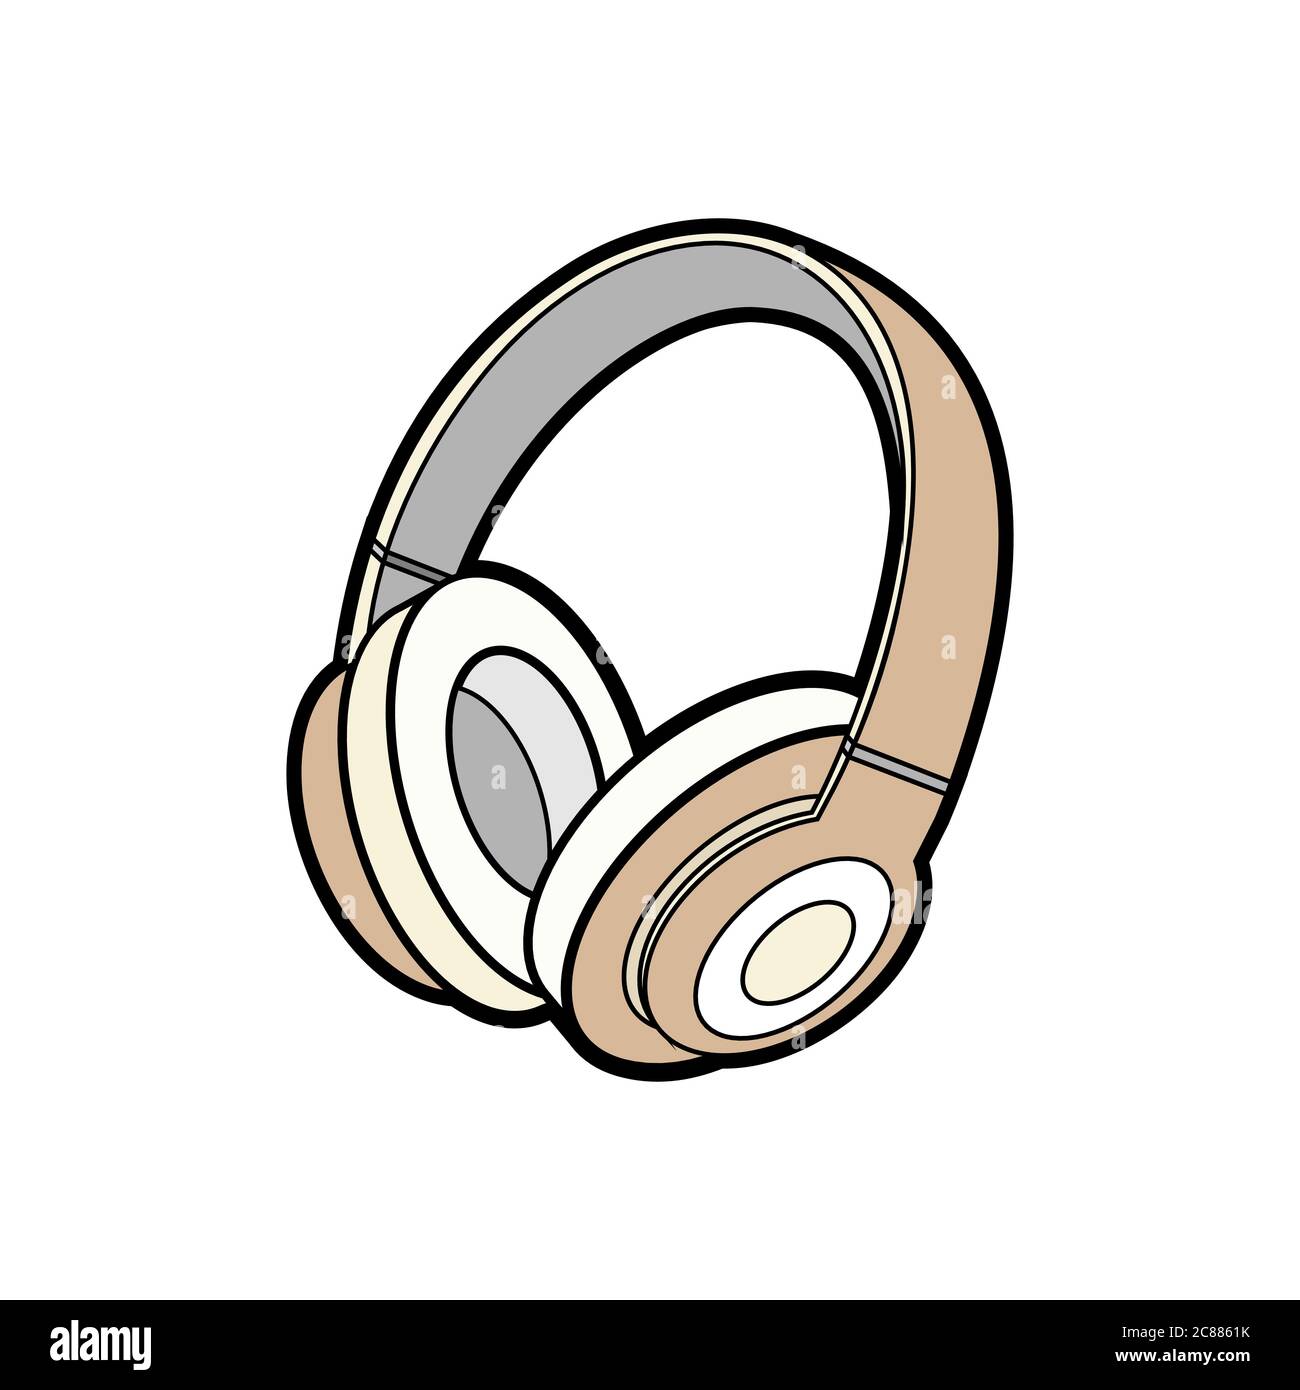 Headphones wireless brown vector isolated. Youth fashion hipster cool headphones illustration minimalist style. Stock Vector